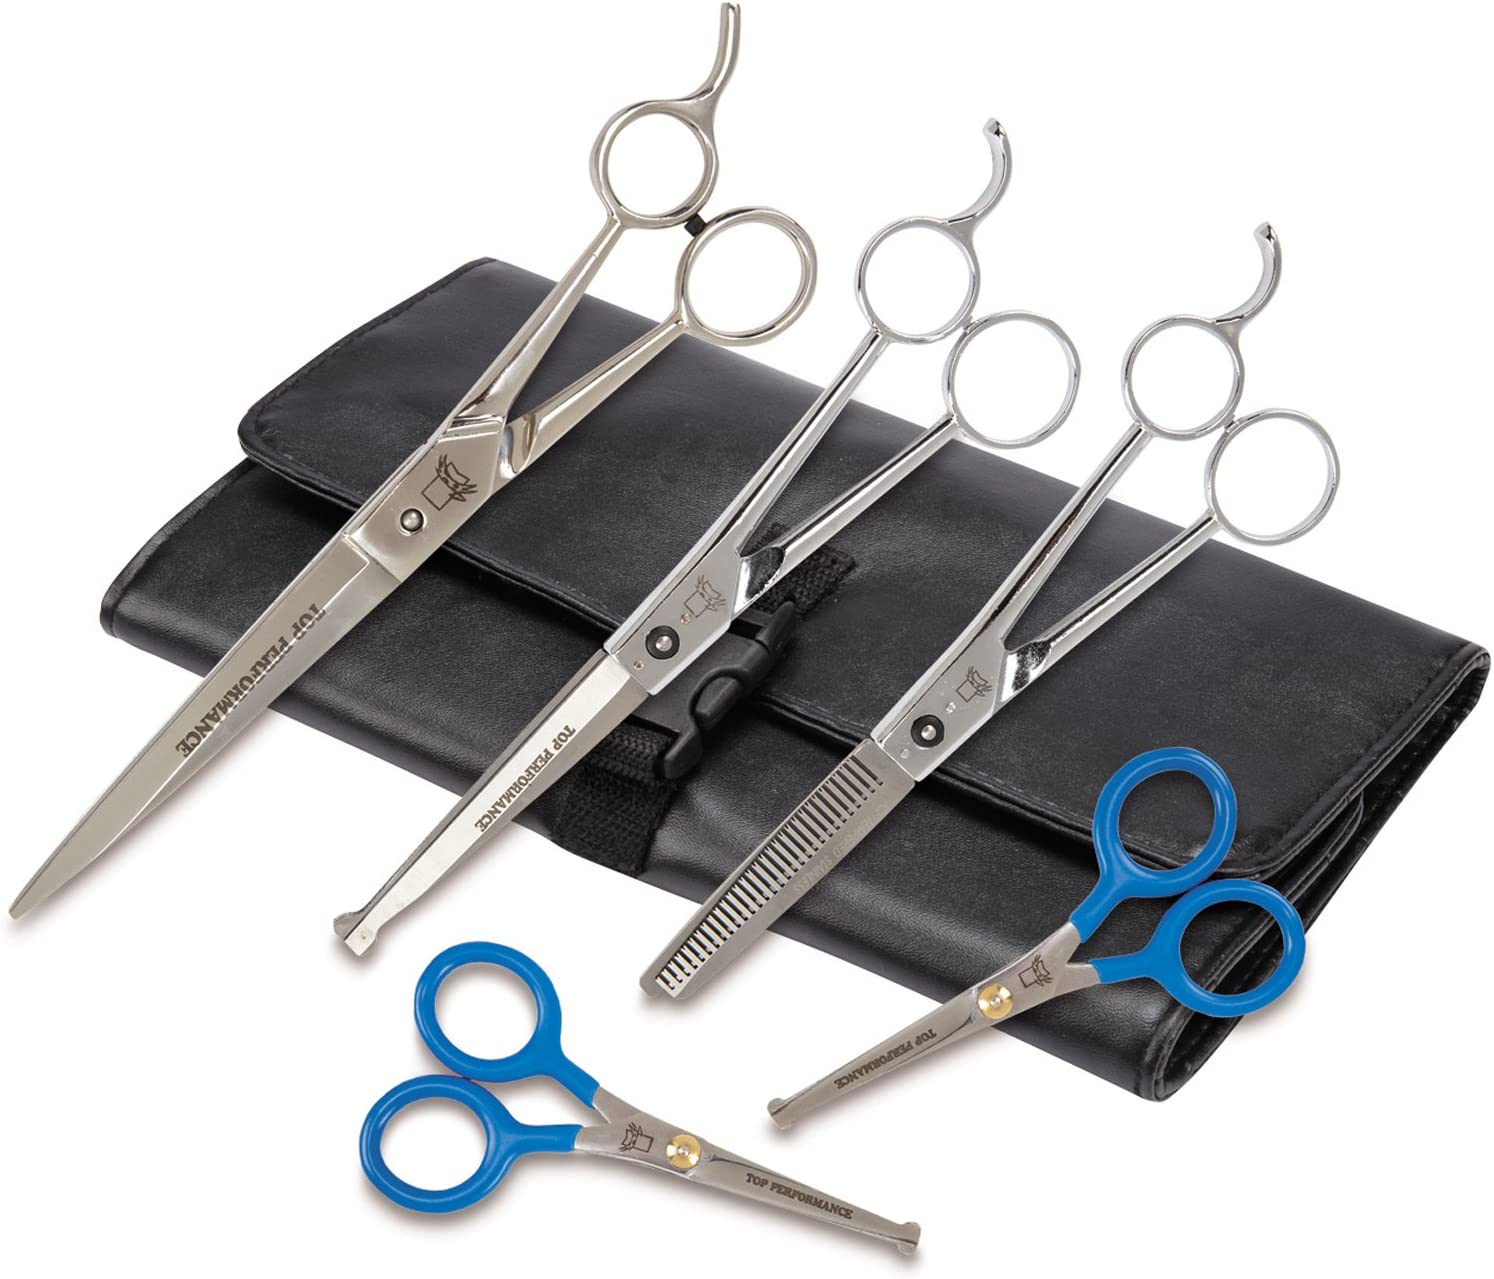 Top Performance 5-Piece Shear Kits with Cases — Durable Shears for Grooming Dogs